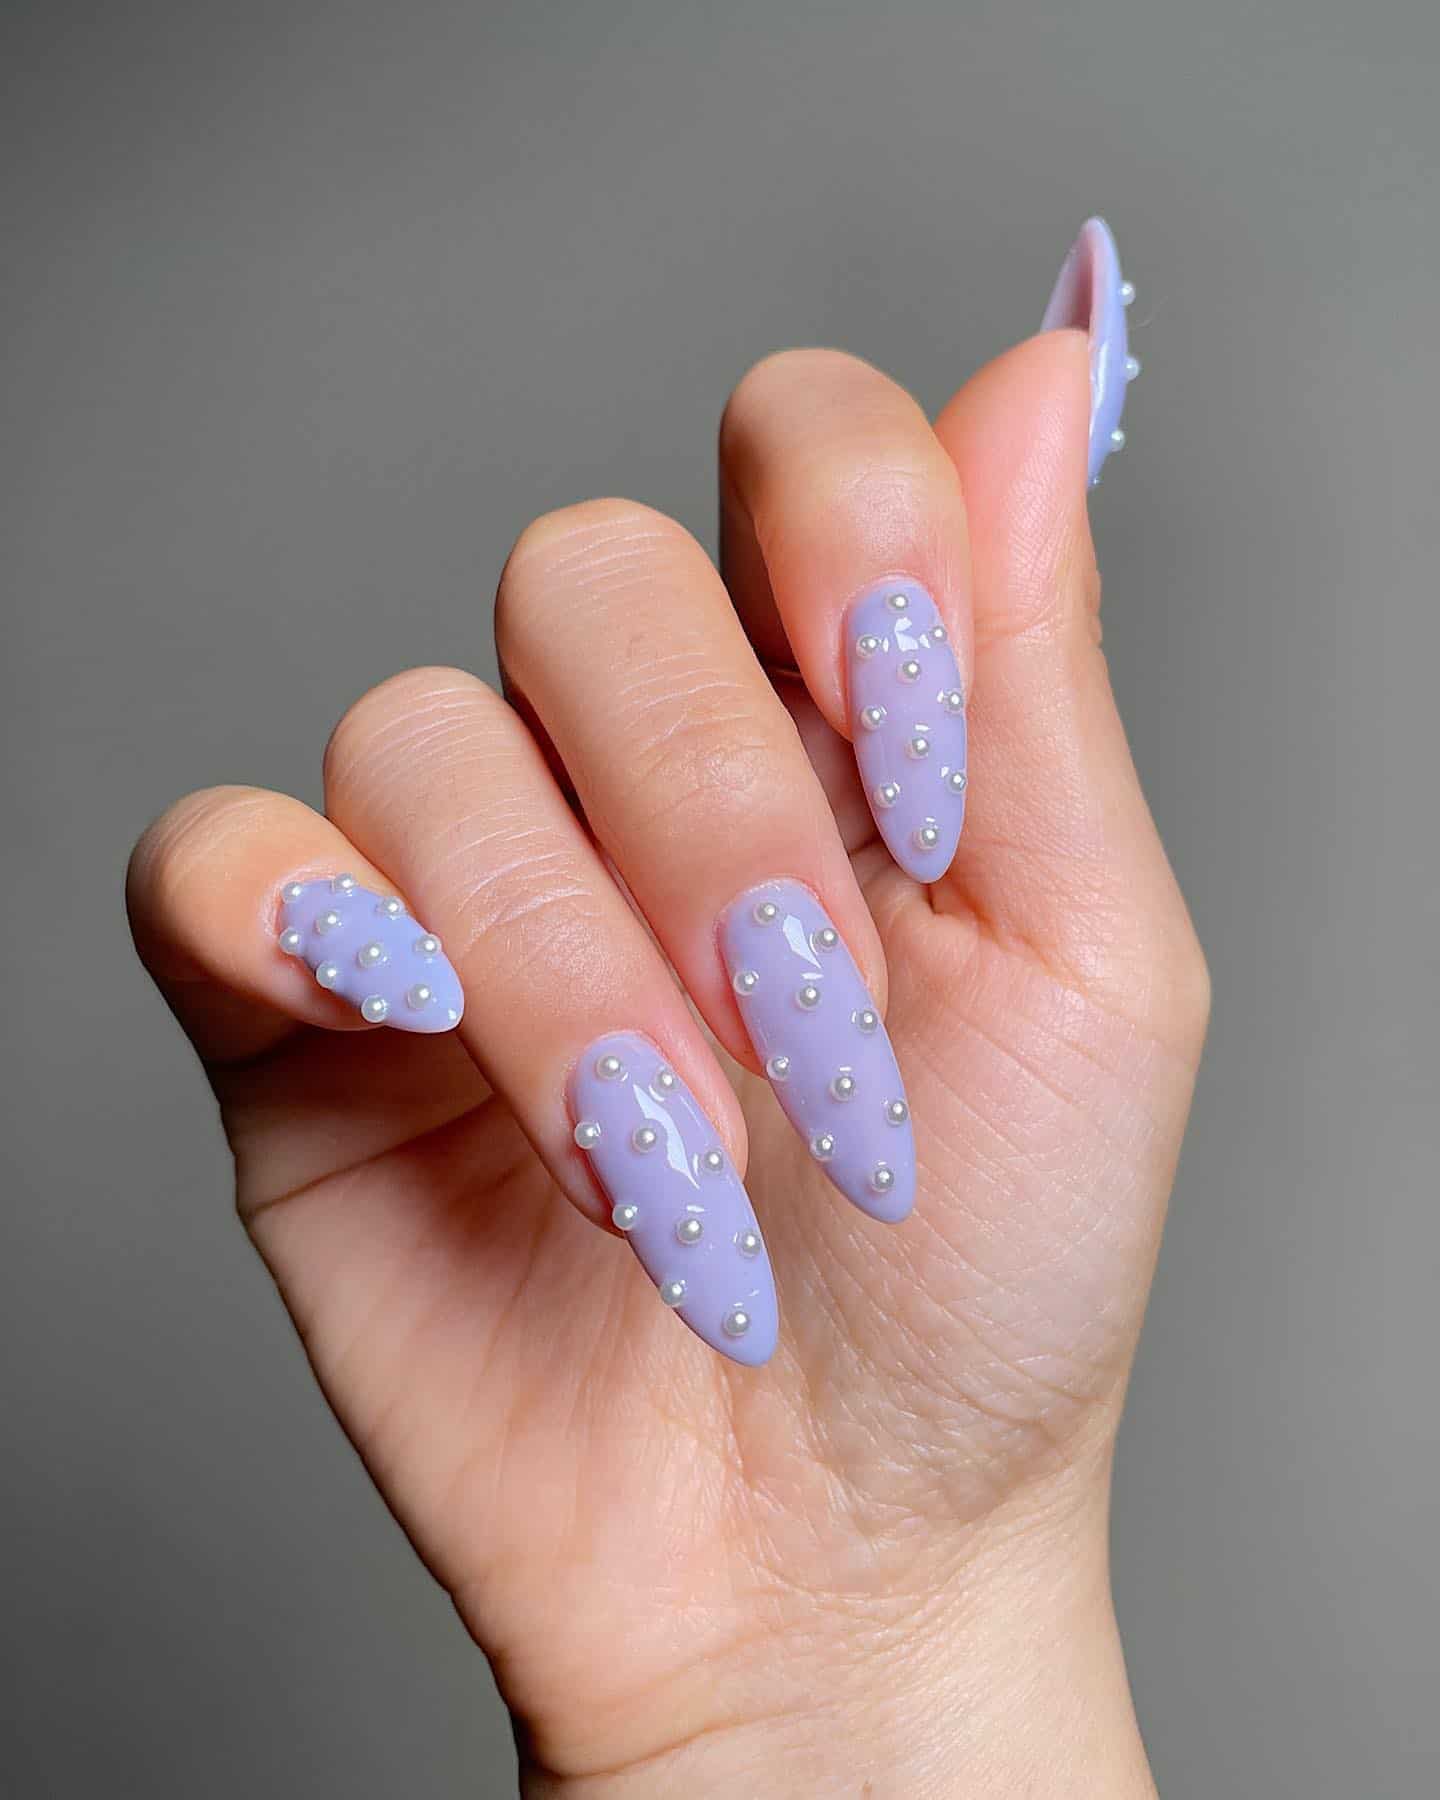 A hand with long solid-colored periwinkle nails and pearl accent beads